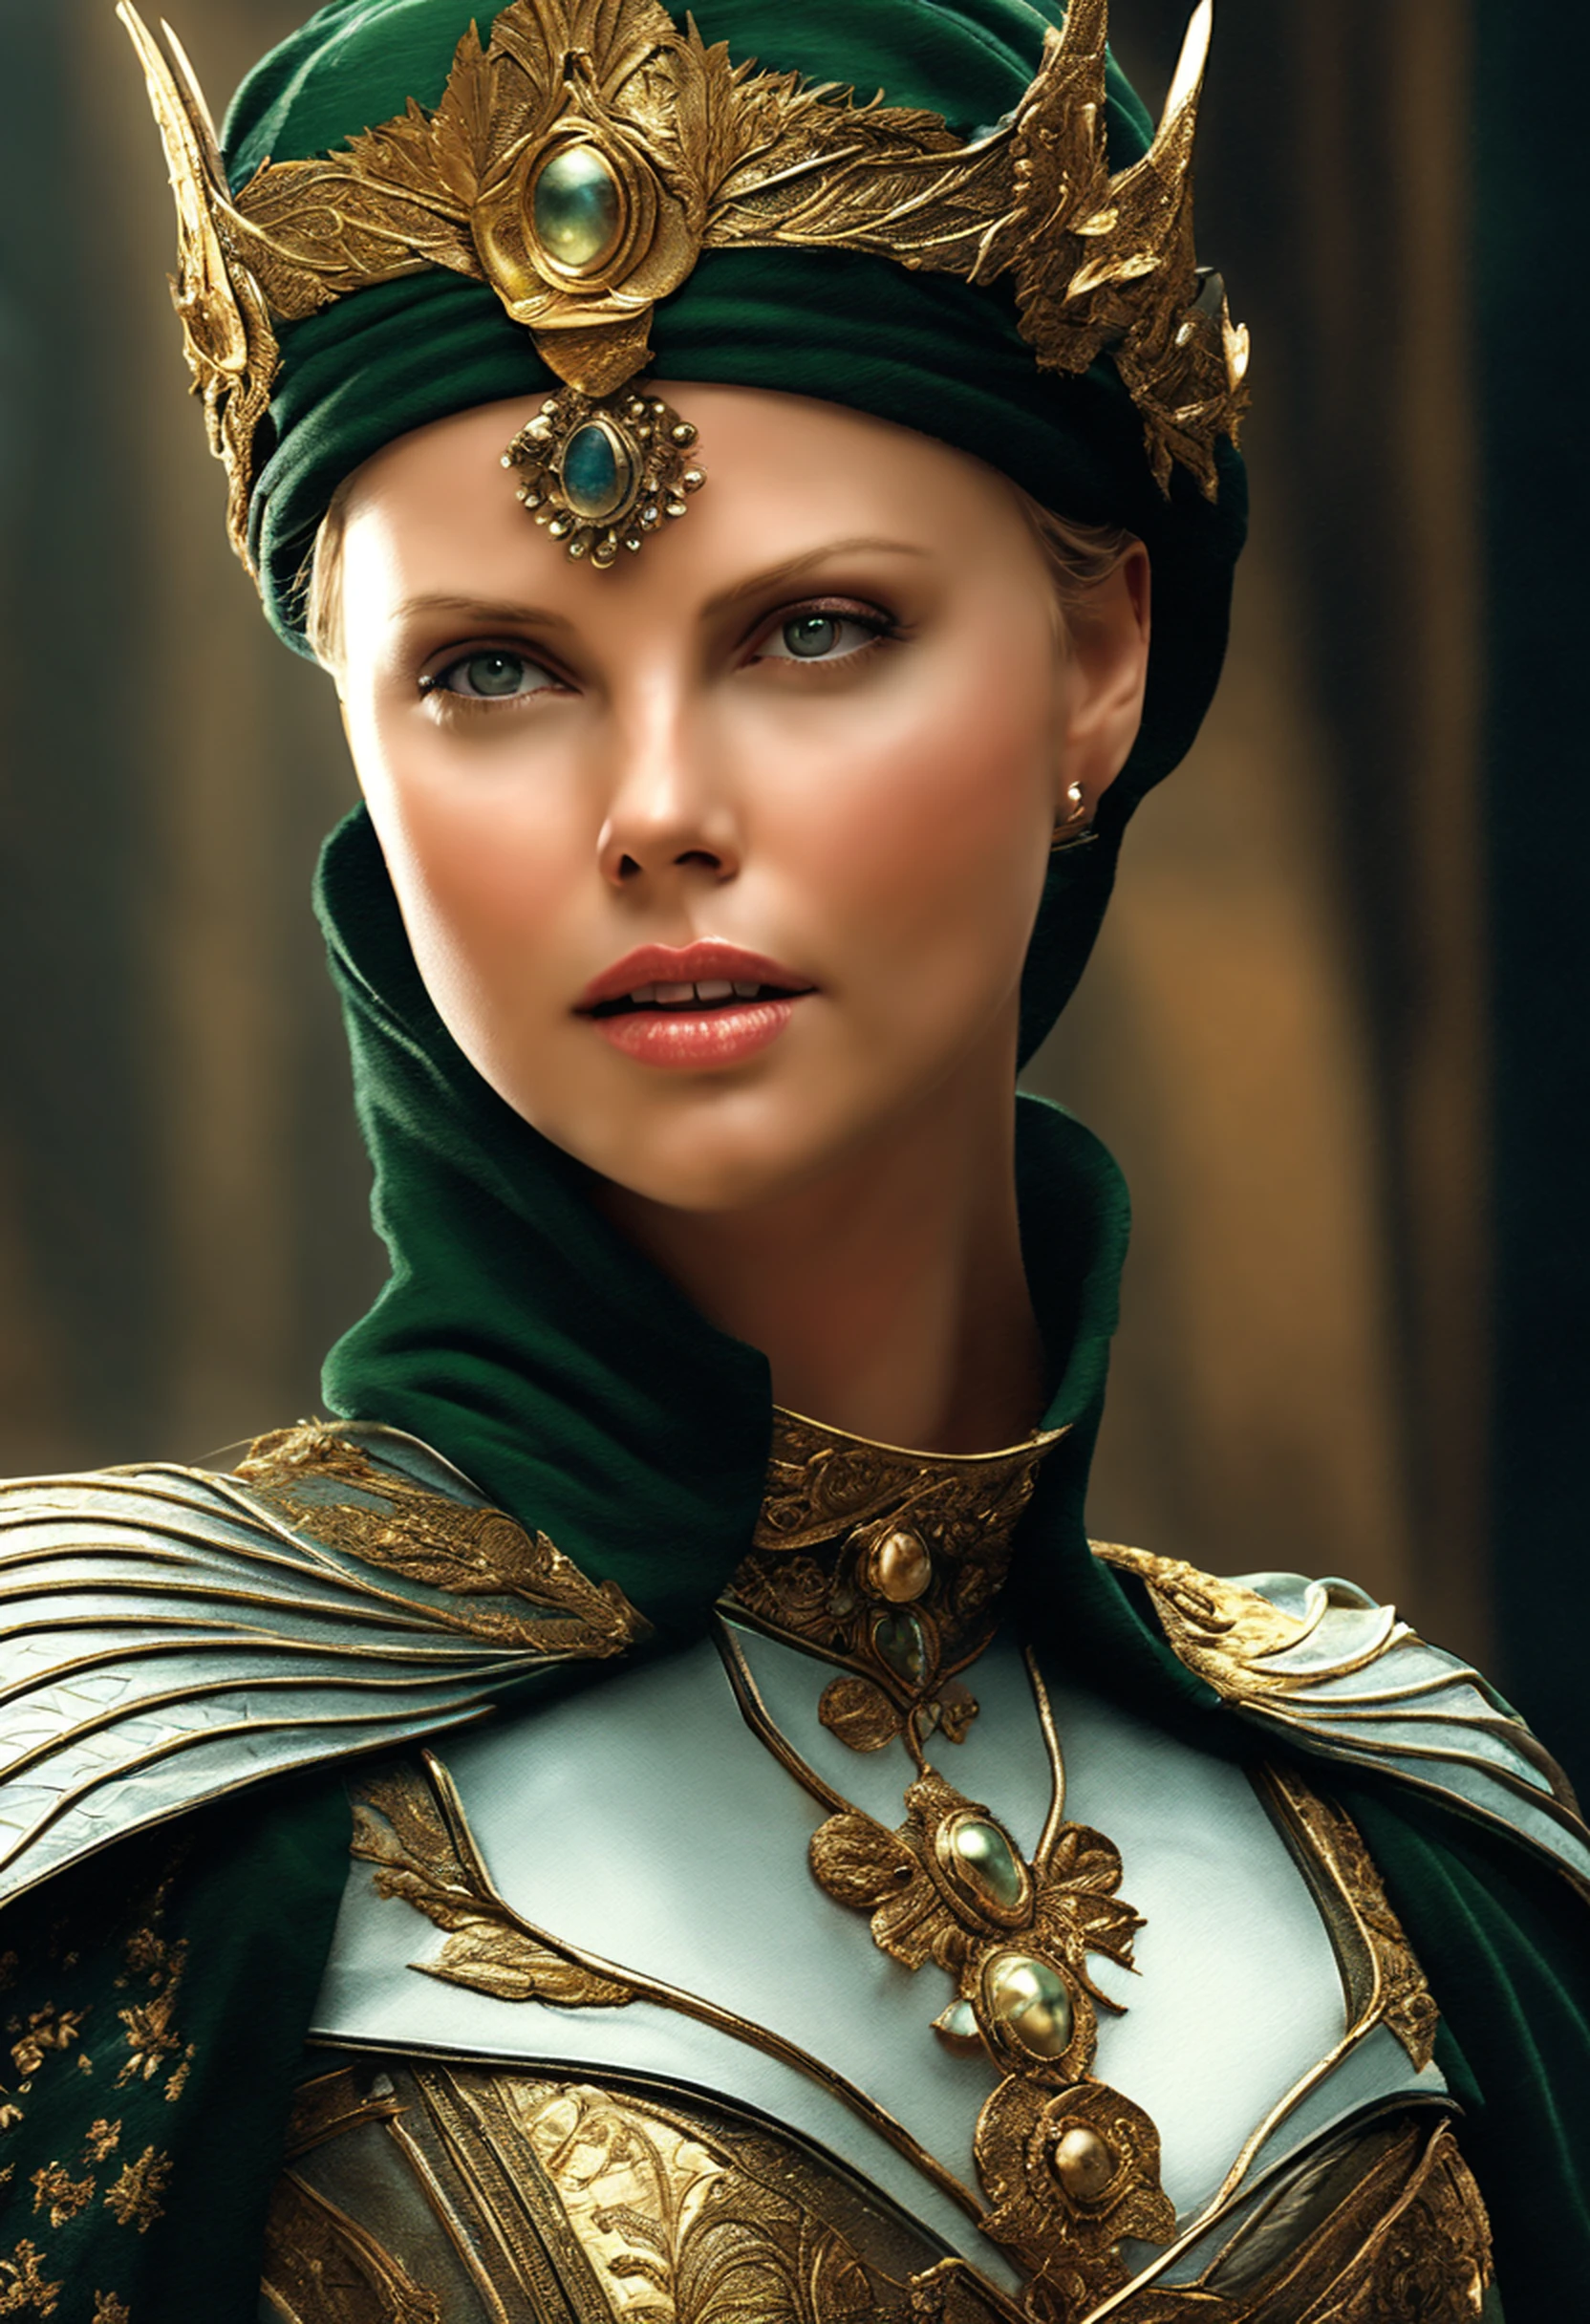 ((Charlize Theron), (arwen)), modelshoot style, Looks like Keira Knightley, (extremely detailed CG unit 8k wallpaper), full shot body photo of the most beautiful artwork in the world, English medieval witch, green vale, pearl skin,golden crown, diamonds, Detailed background with medieval architecture, professional majestic oil painting by Ed Blinkey, Atey Ghailan, ghibli studio, Directed by: Jeremy Mann, Greg Manxadinho, Antonio Moro, trending on ArtStation, trending in cgsociety, intrikate, High detail, sharp focus, Dramatic, photorealistic painting art by midjourney and greg rutkowski